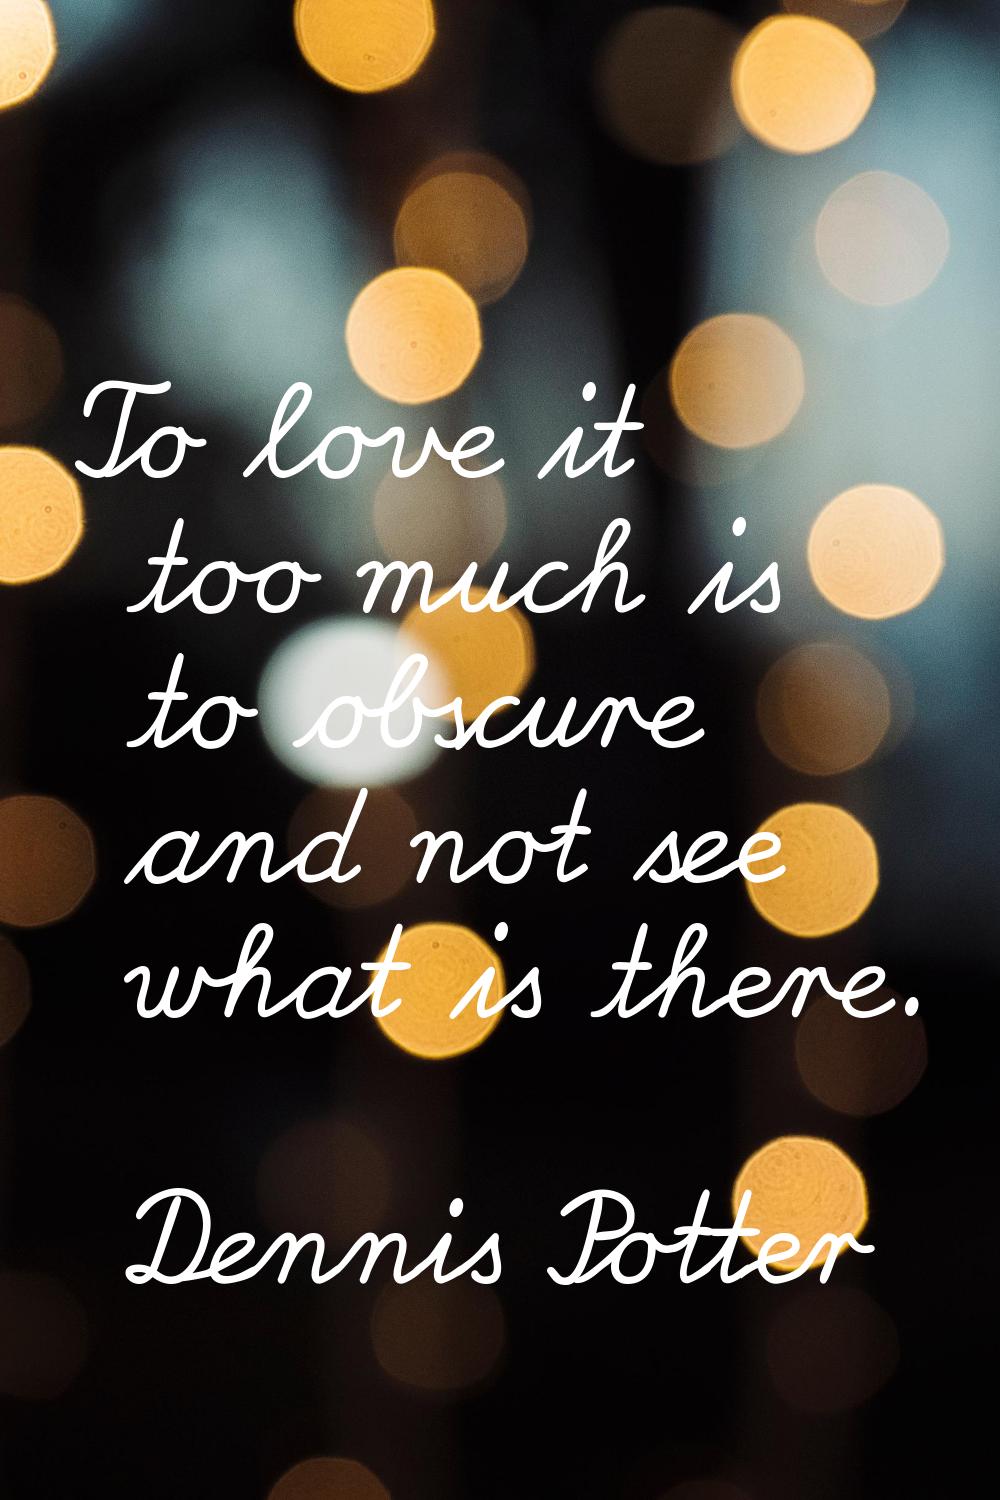 To love it too much is to obscure and not see what is there.